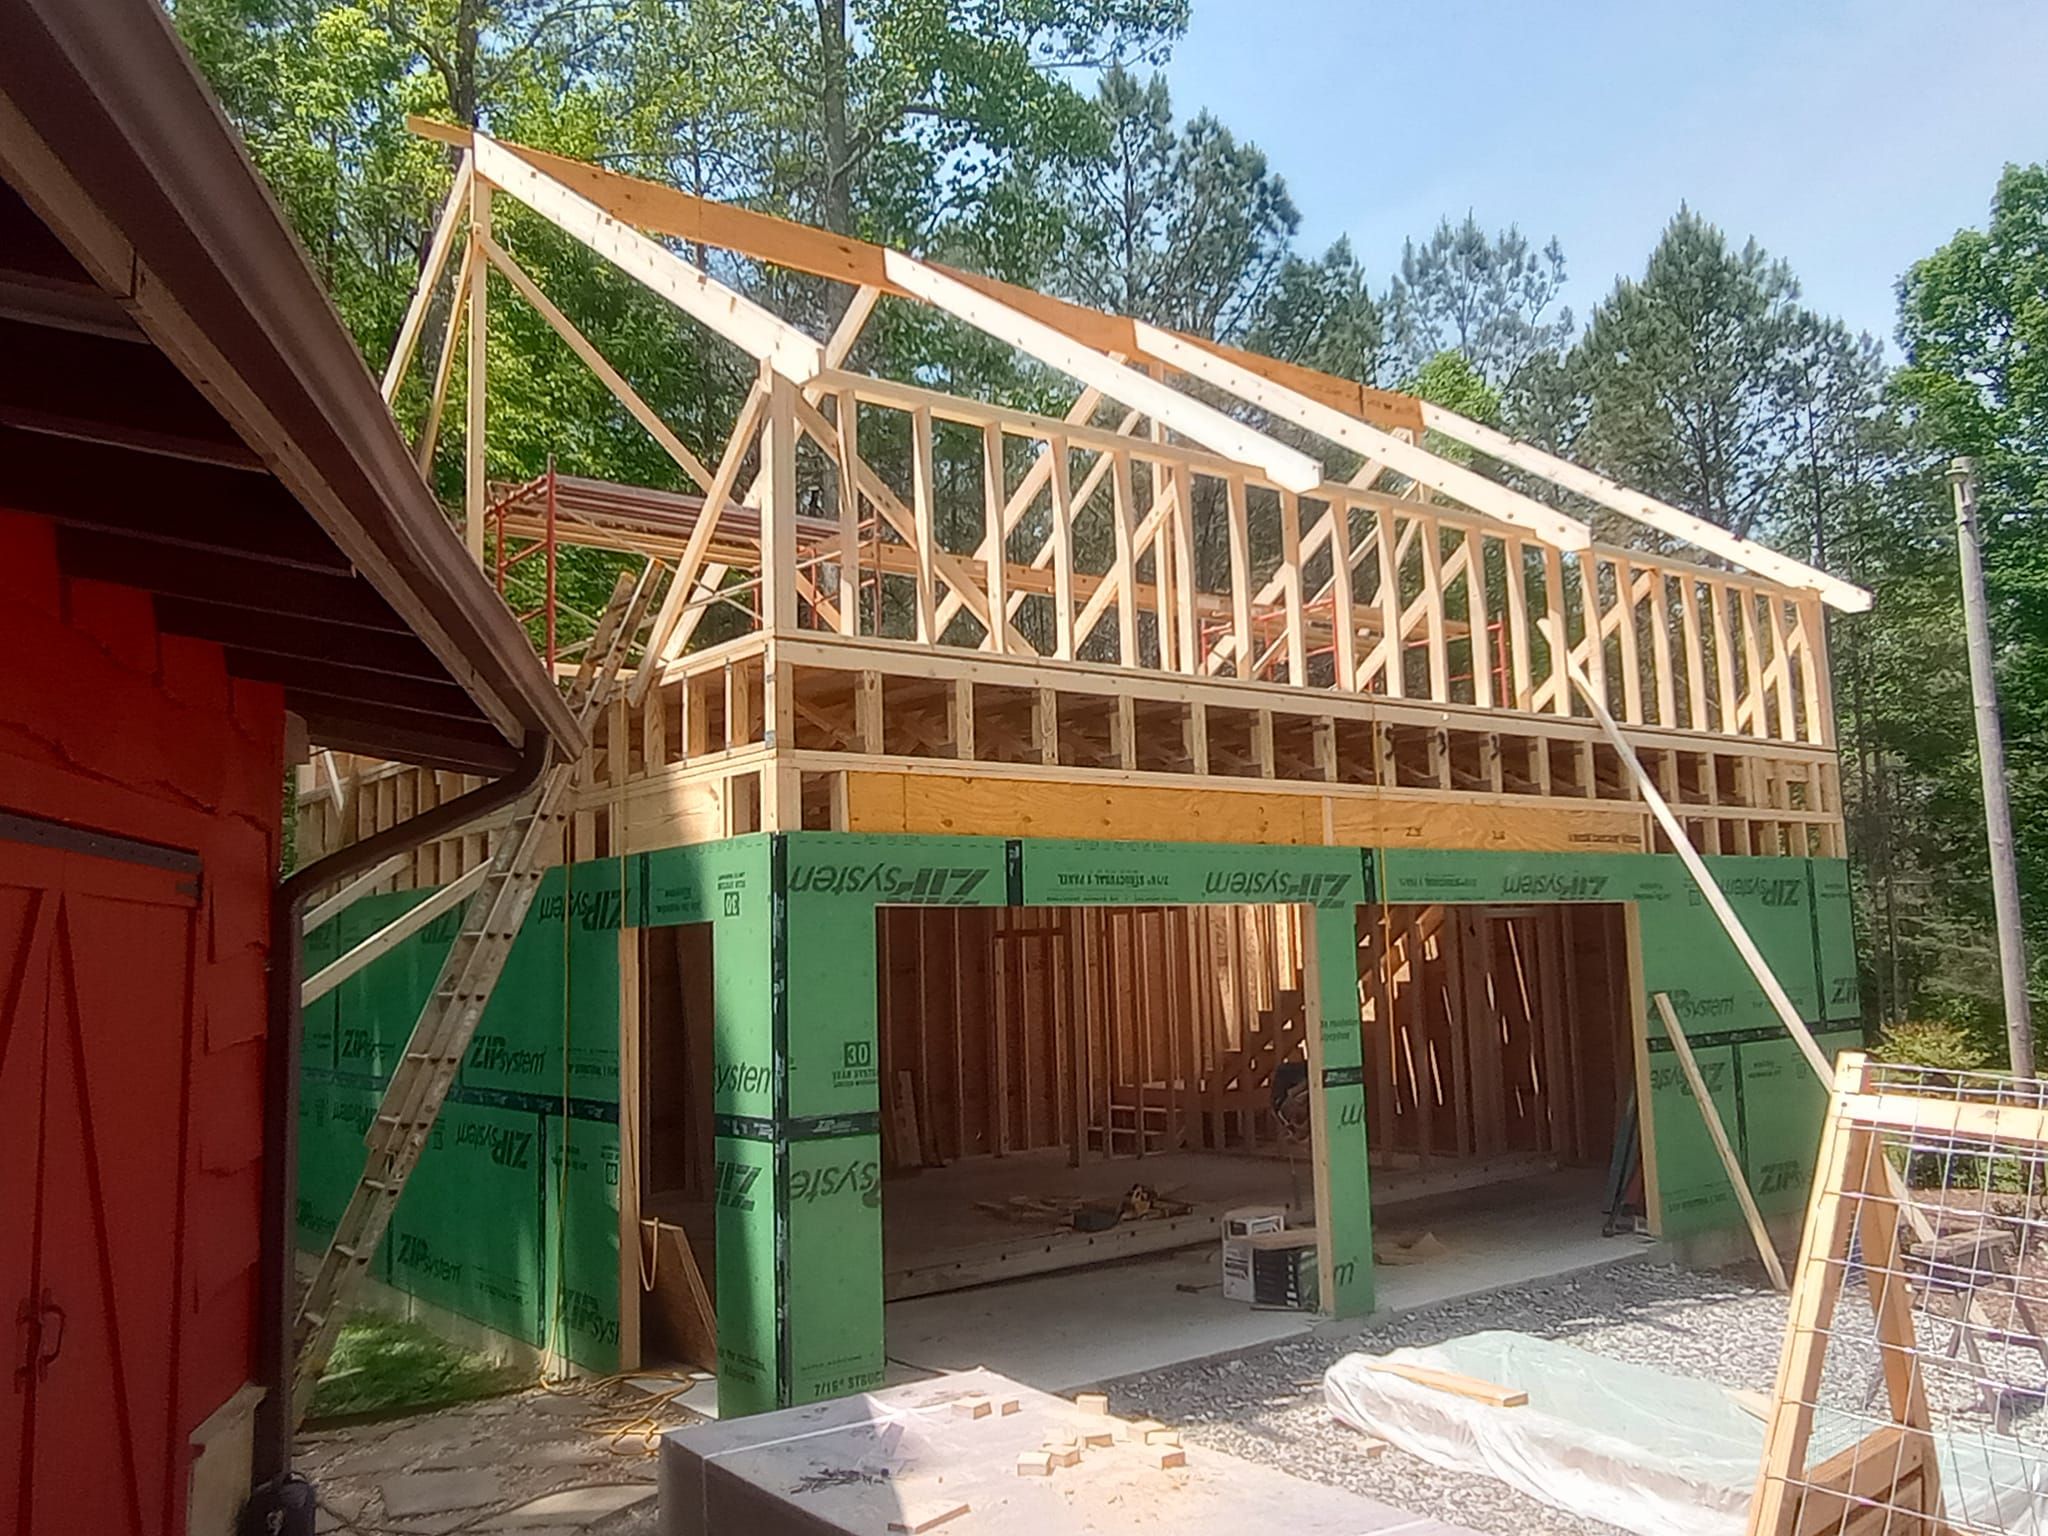 All Photos for Kevin Terry Construction LLC in Blairsville, Georgia